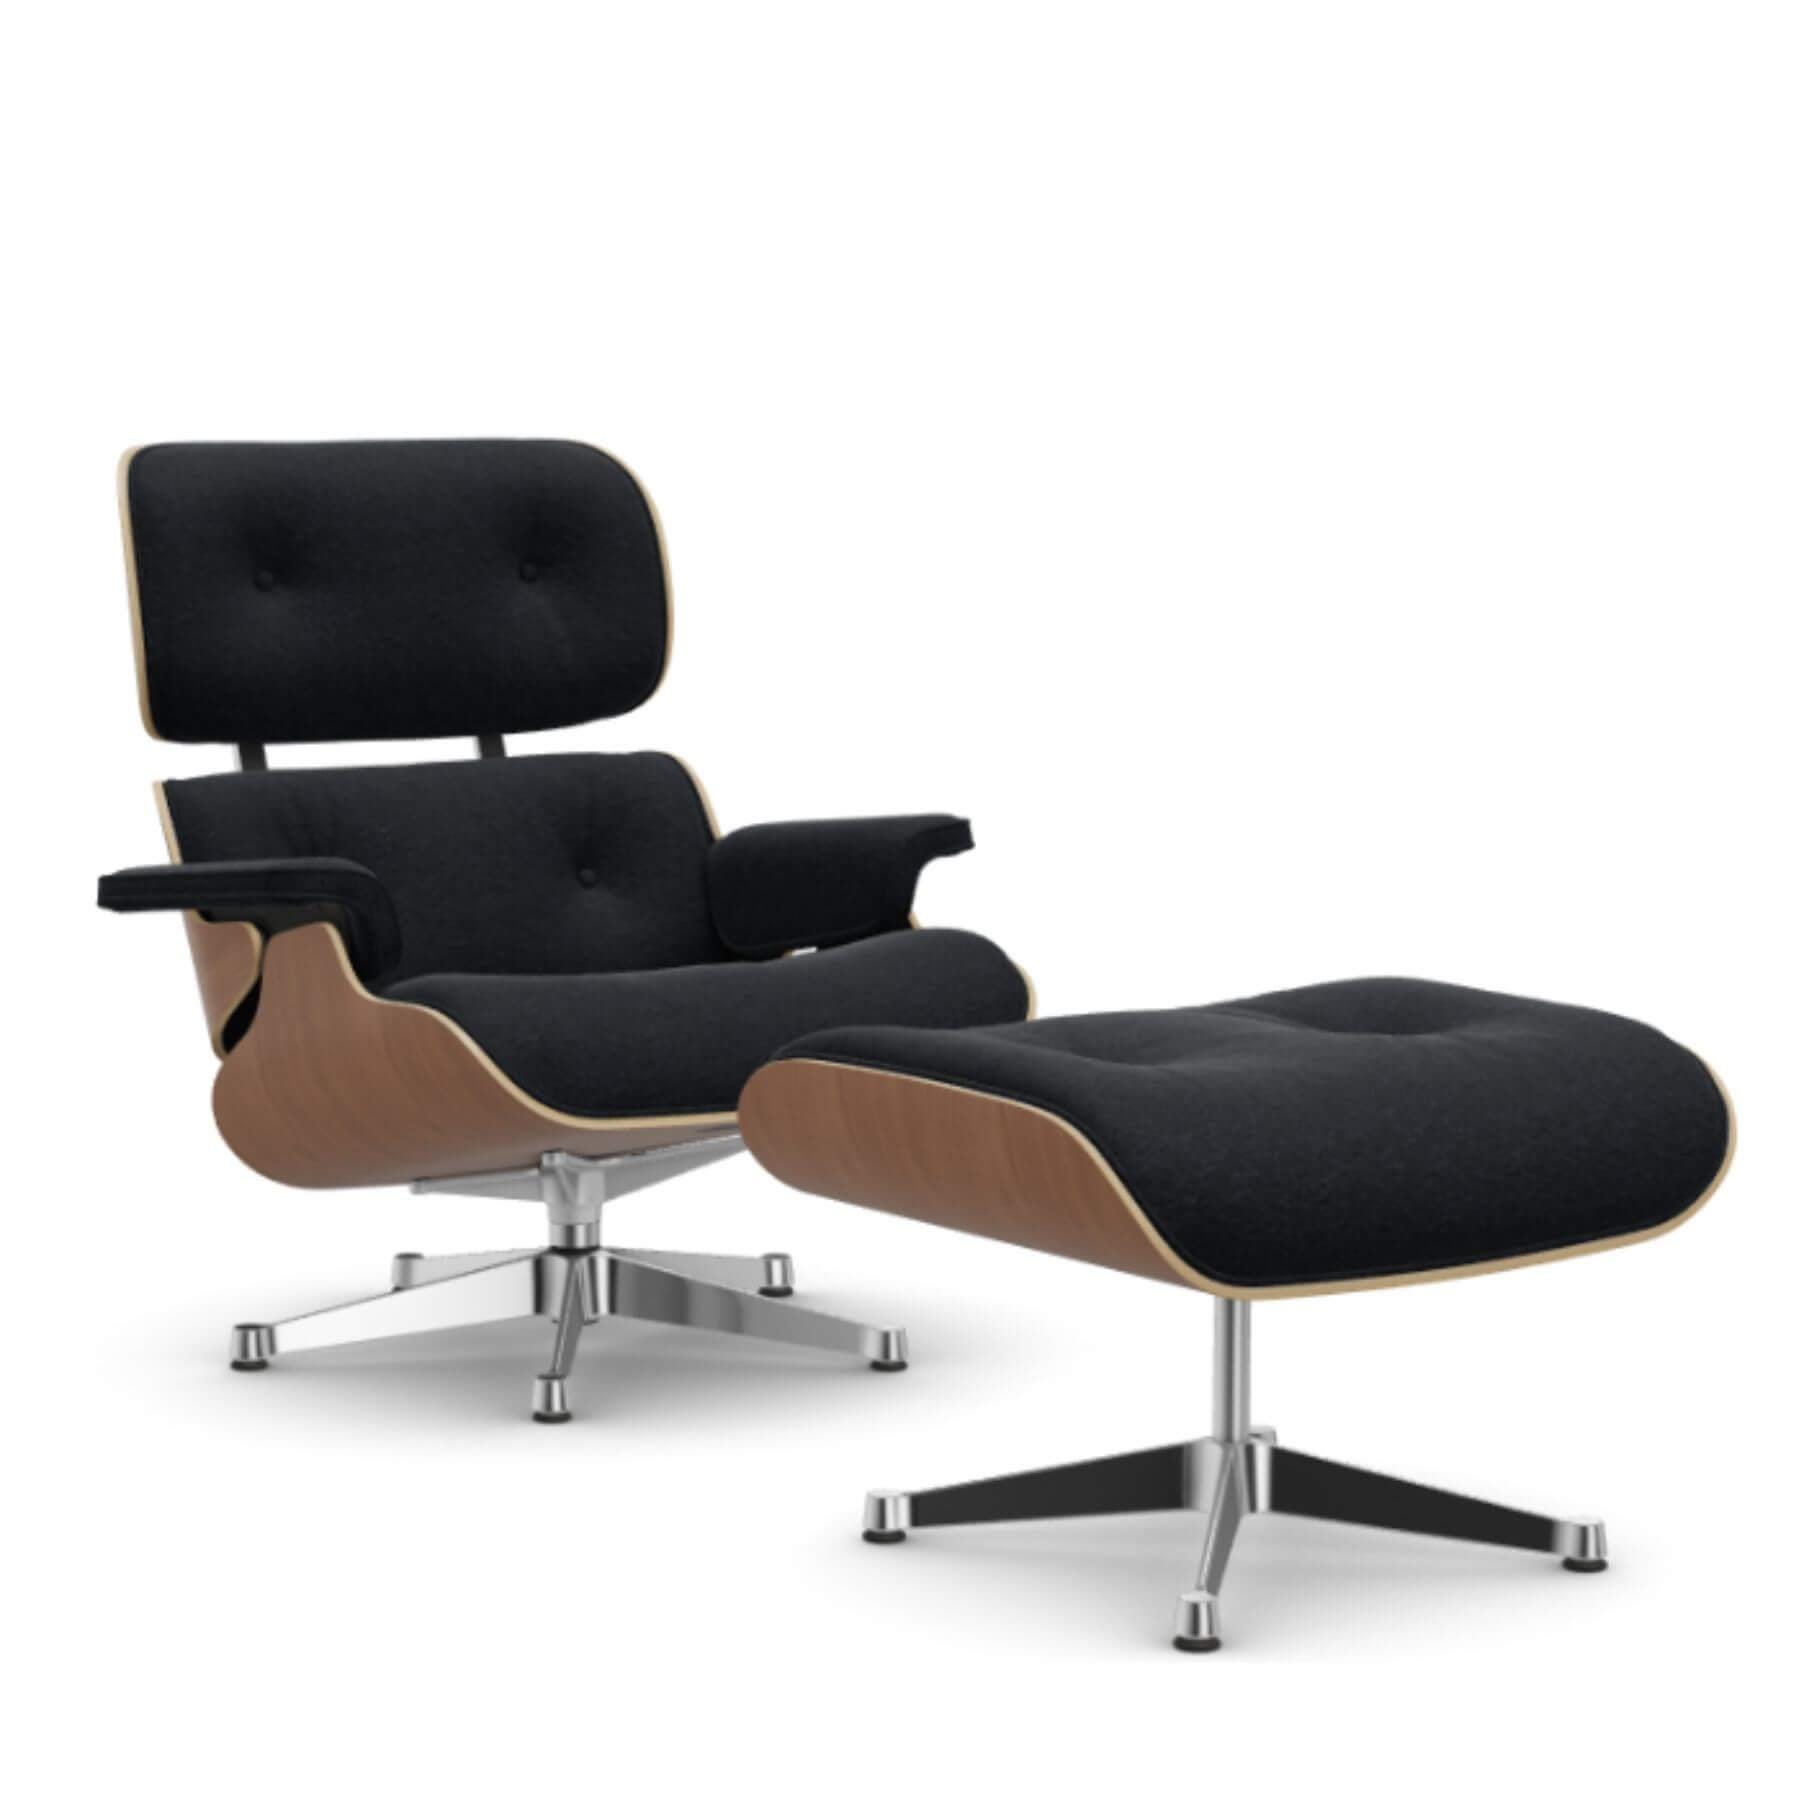 Vitra Eames Classic Lounge Chair American Cherry Nubia Black Anthracite Polished Aluminium With Ottoman Light Wood Designer Furniture From Hollowa